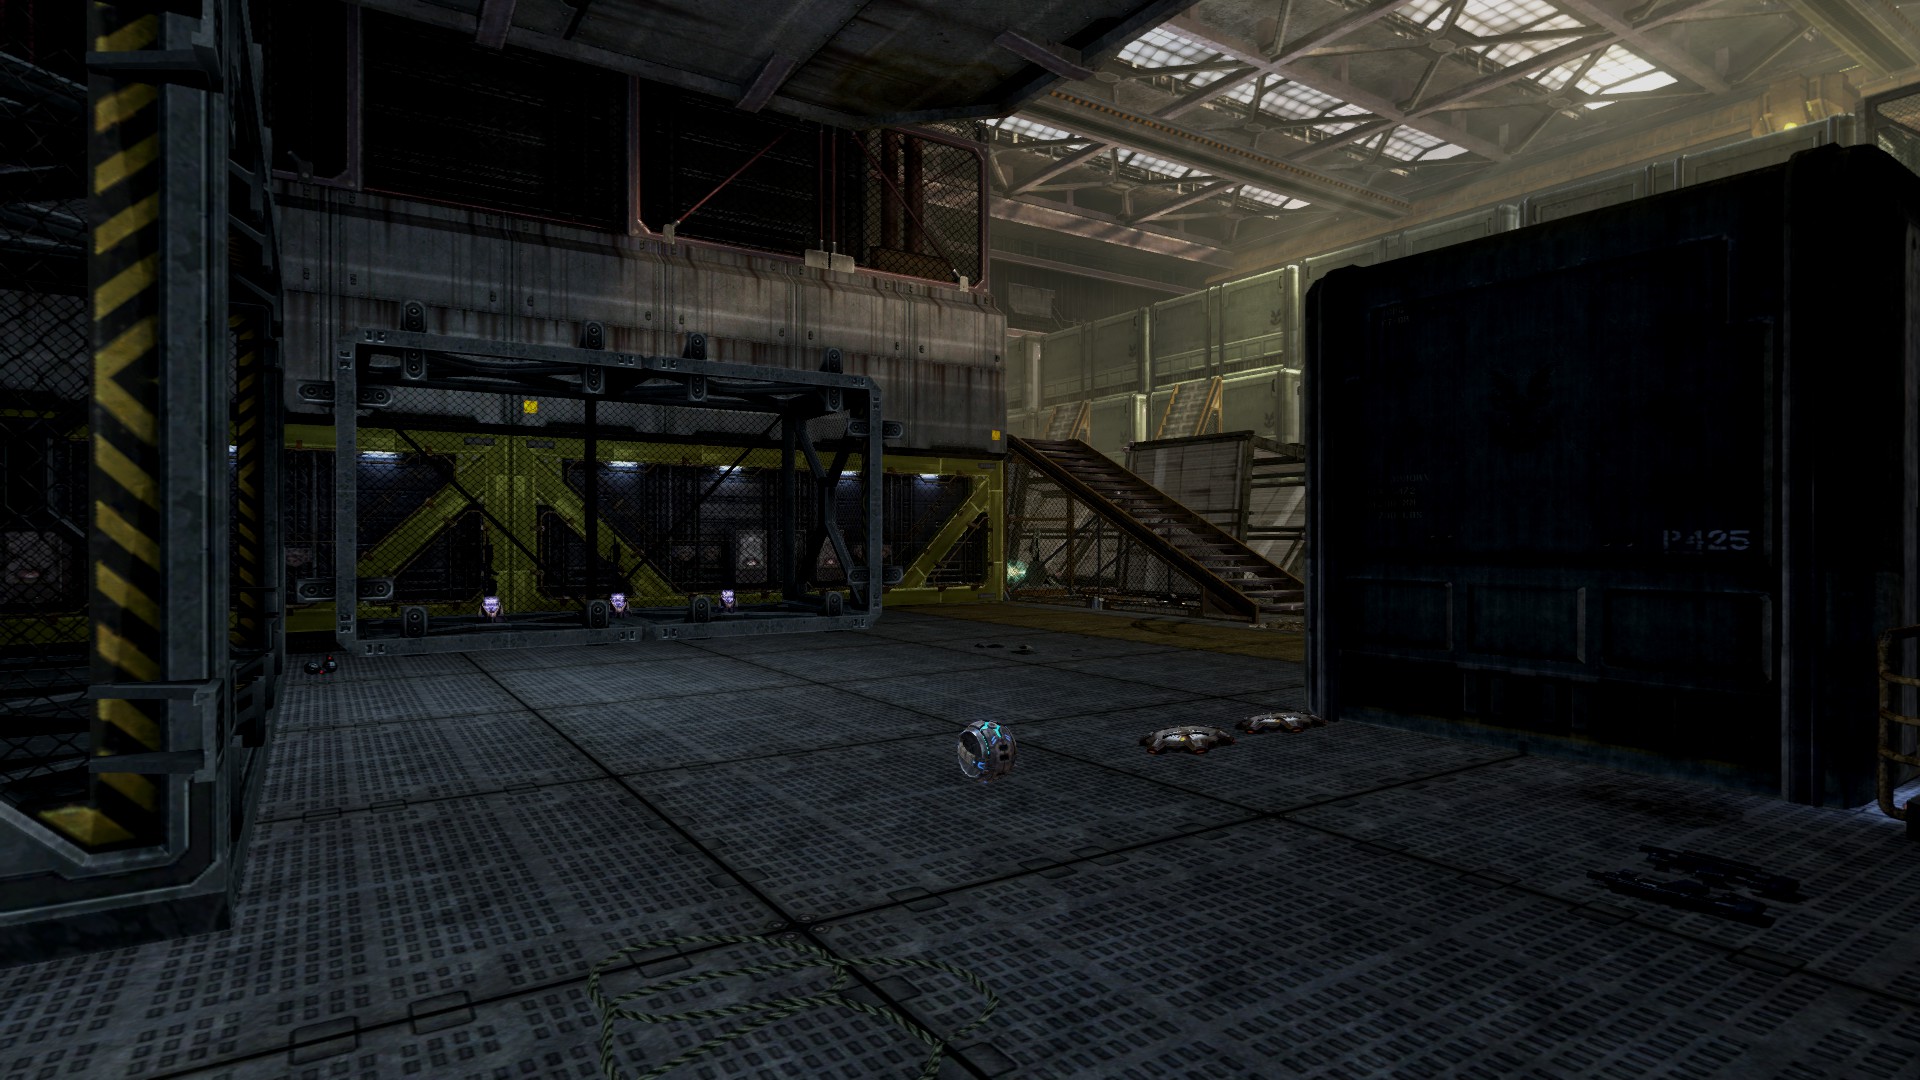 Less conspicuous in the staging areas are the grenade spawns between the two mesh weapon cages.